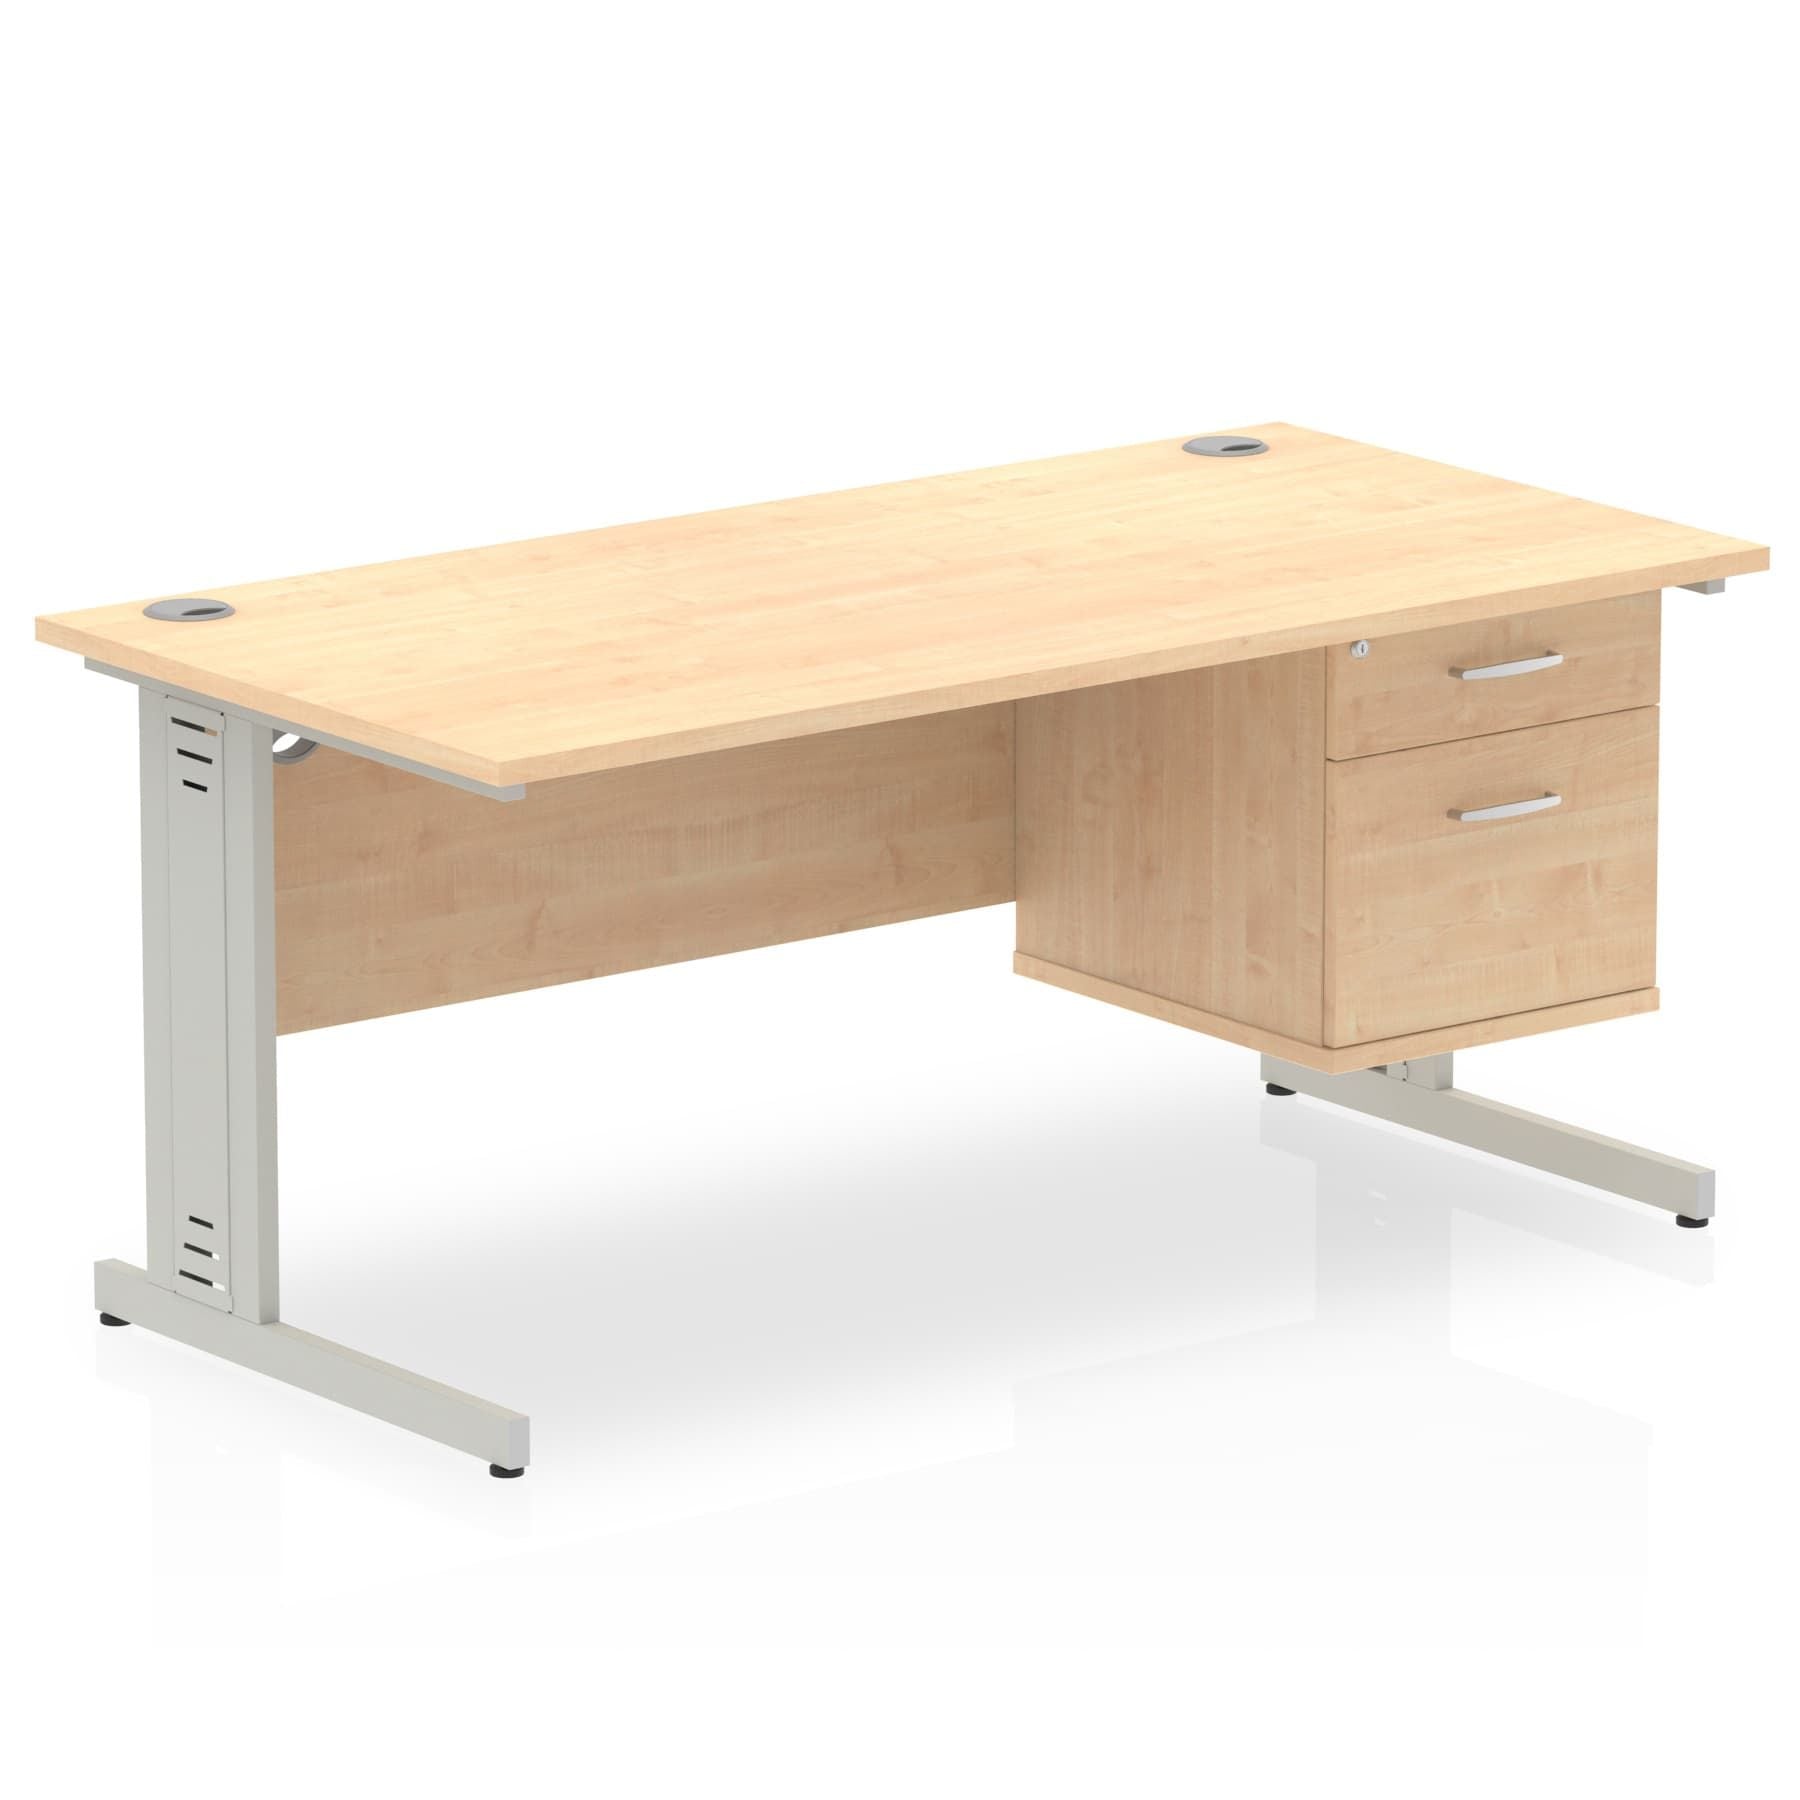 Impulse 1600mm Cable Managed Straight Desk w/ Fixed Pedestal - MFC Rectangular, 5-Year Guarantee, Self-Assembly, 2/3 Lockable Drawers